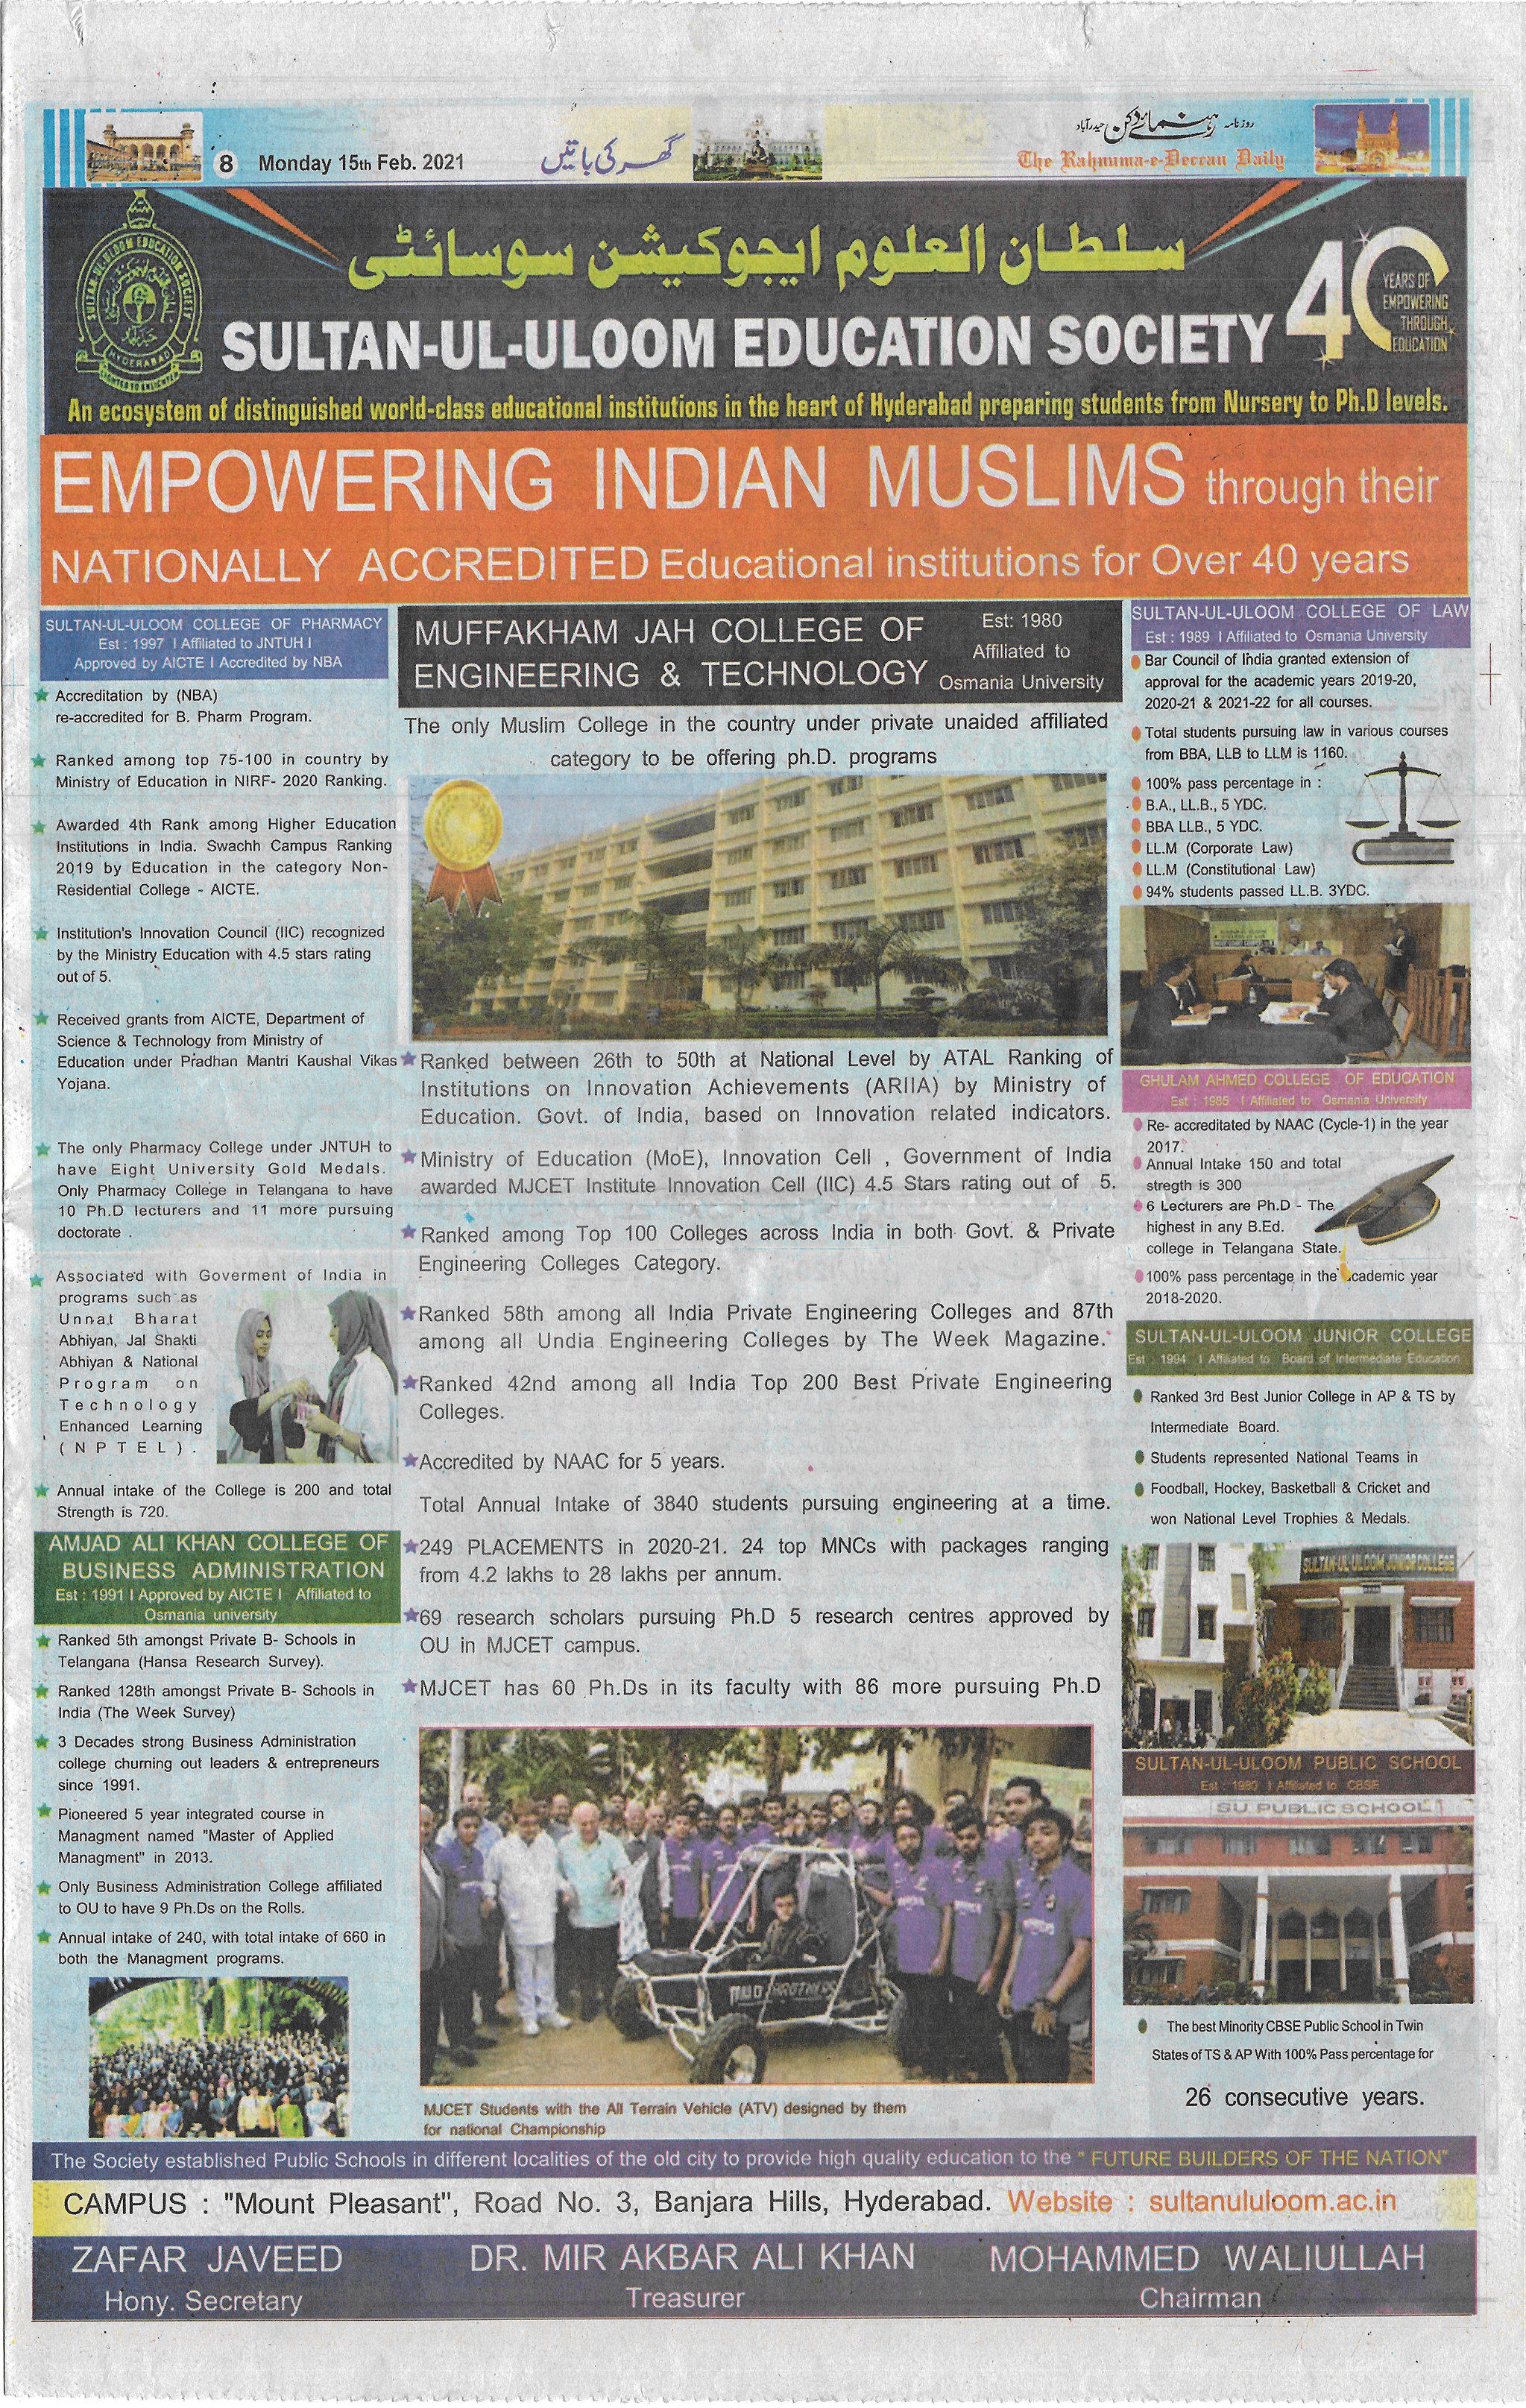 Sultan-ul-Uloom Education Society Empowering Indian Muslims through their Nationally Accredited Educational Institutions for over 40 Years.